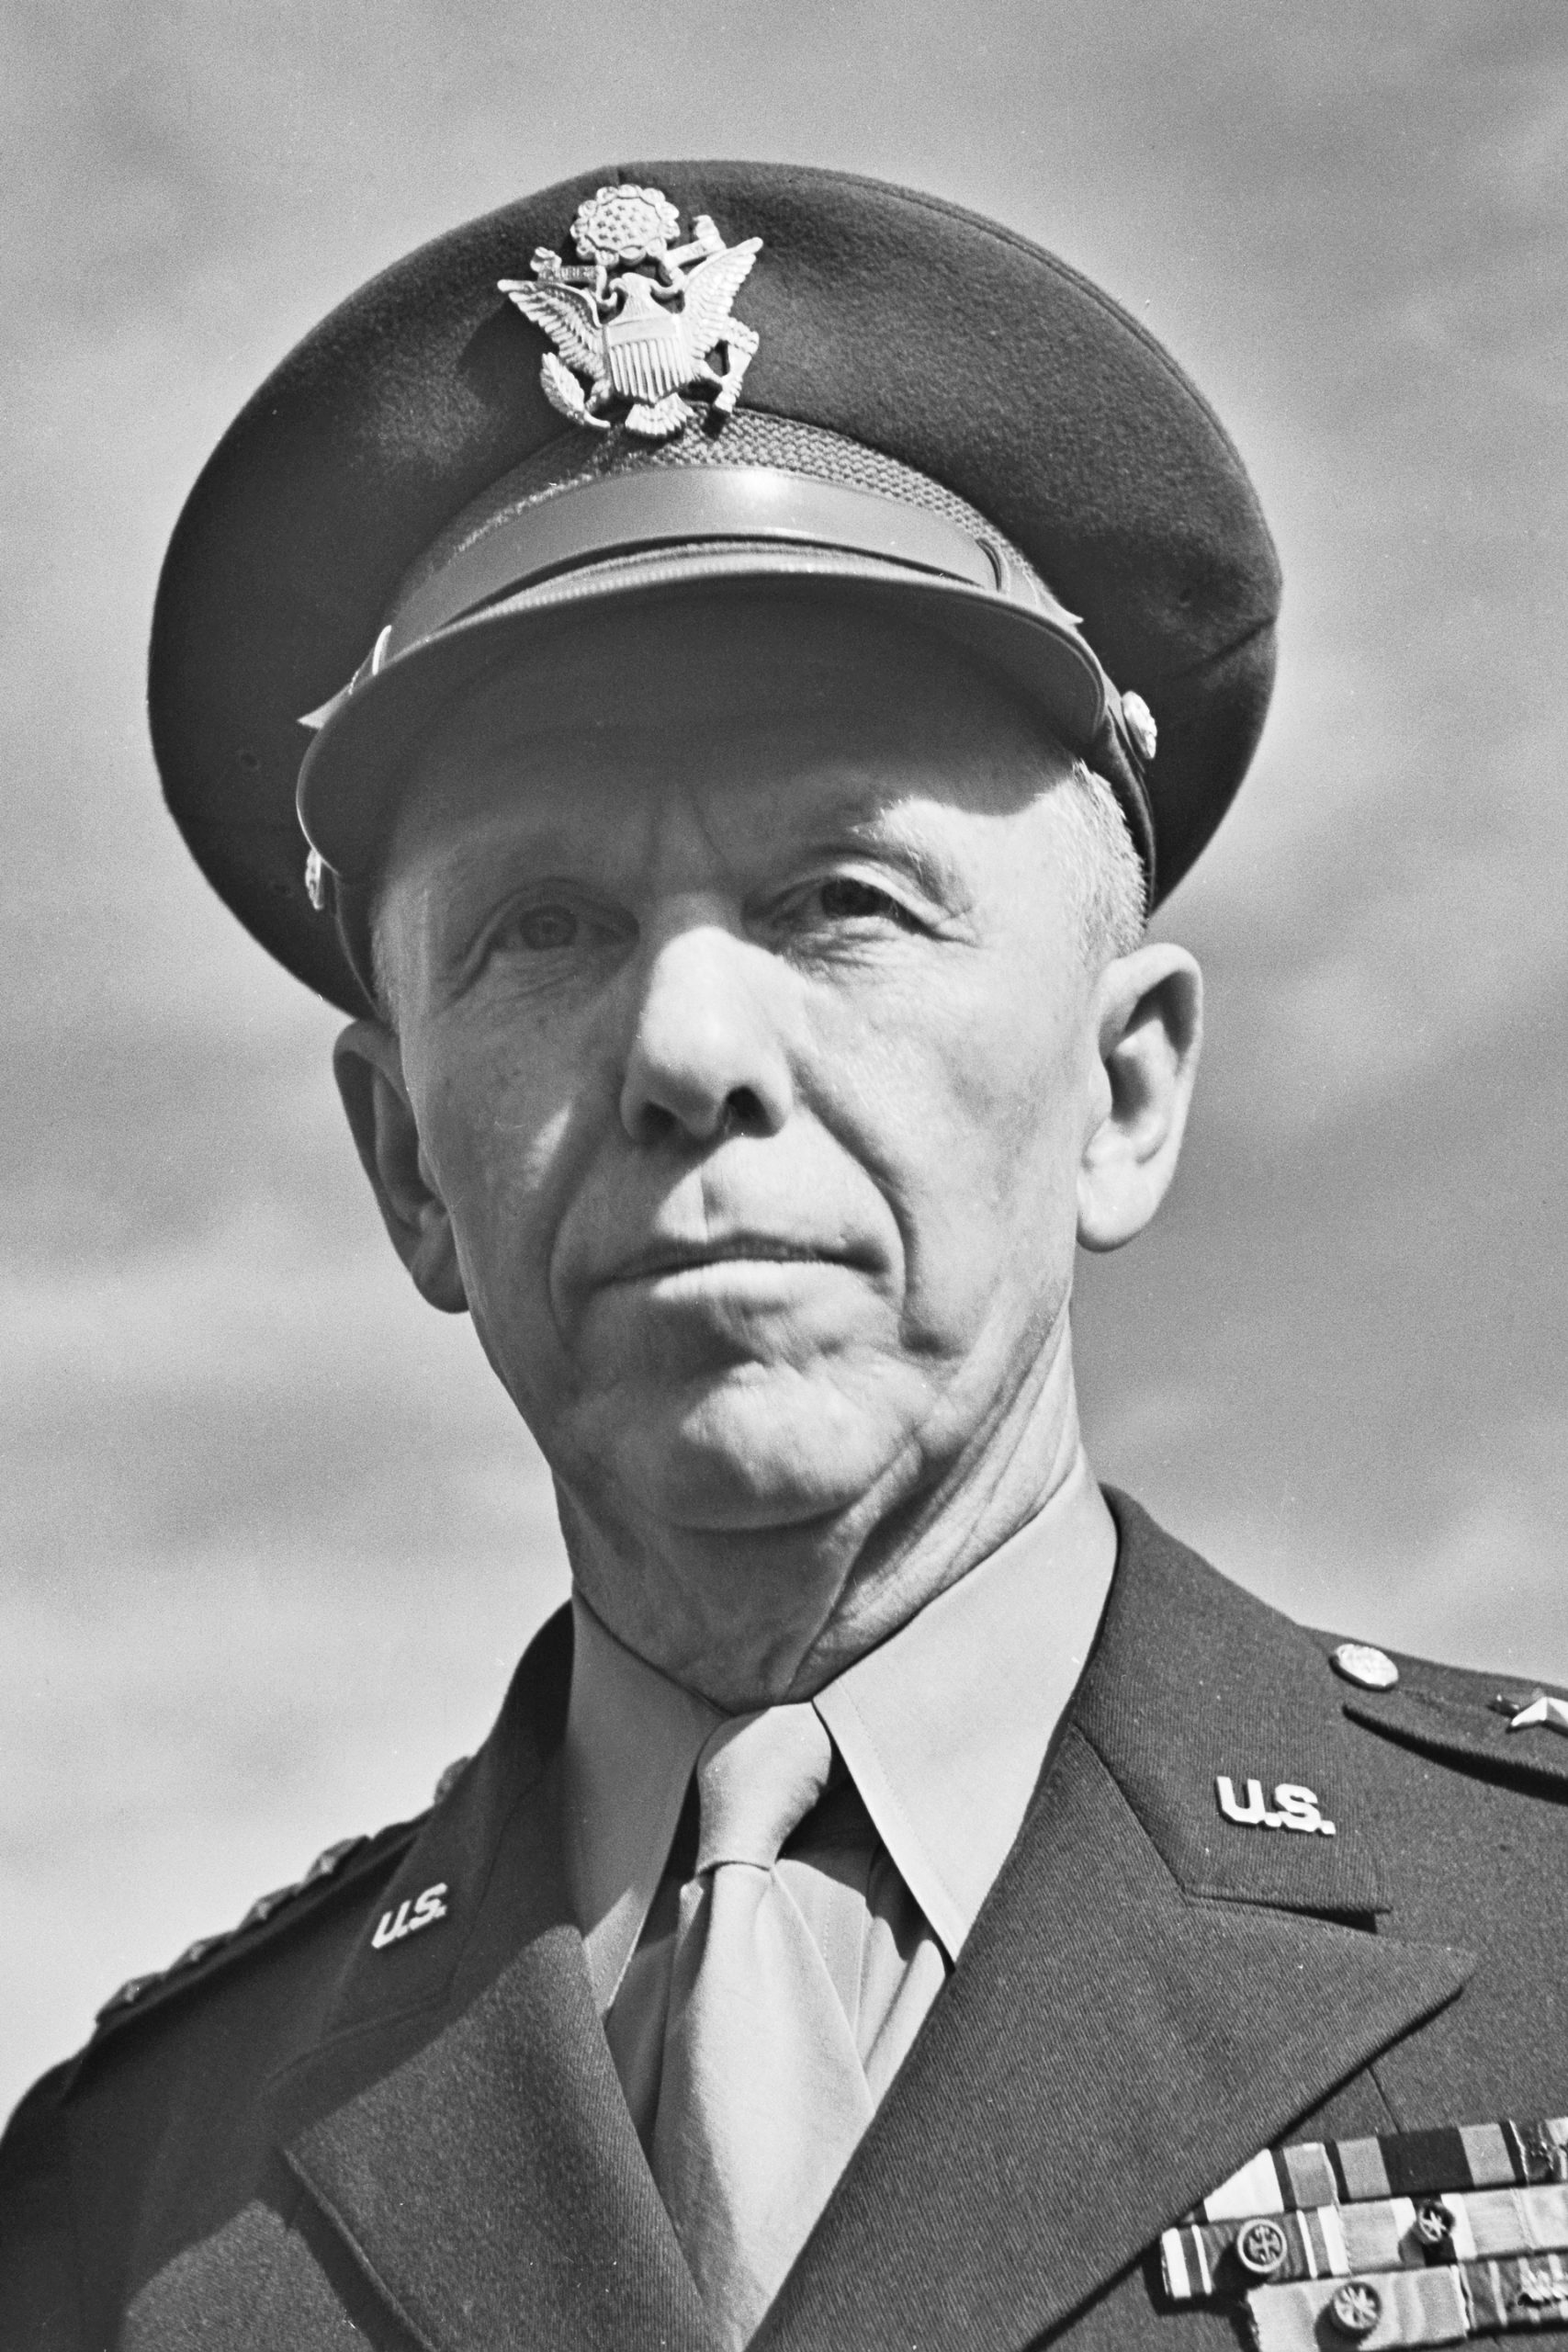 A photo of General George Marshall